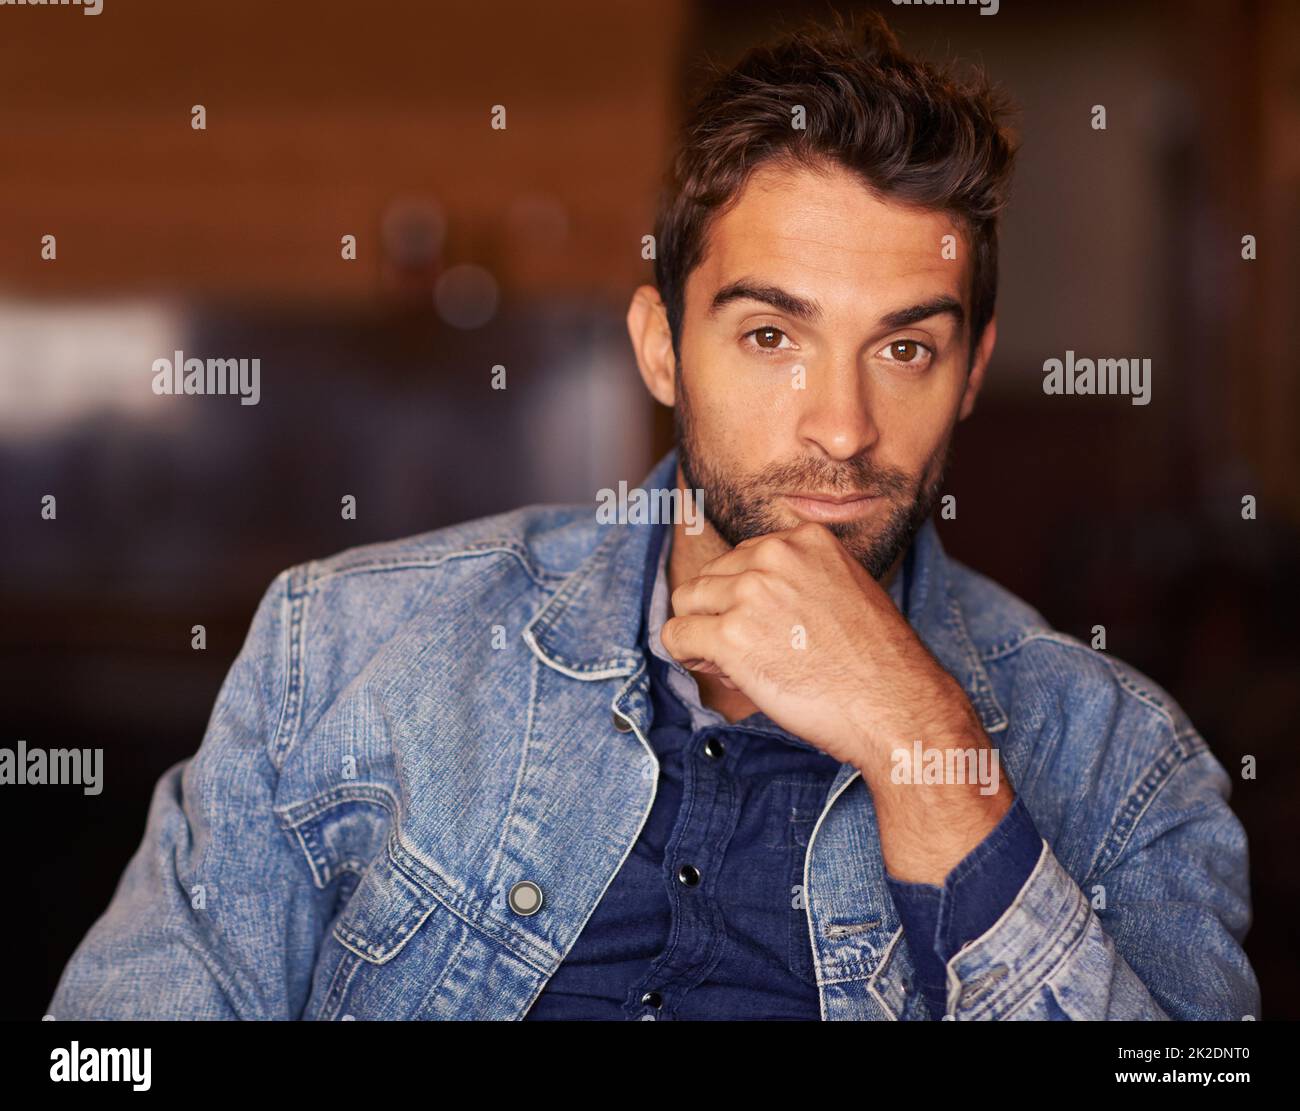 Whats on your mind. Portrait of a handsome young man wearing denim clothing. Stock Photo